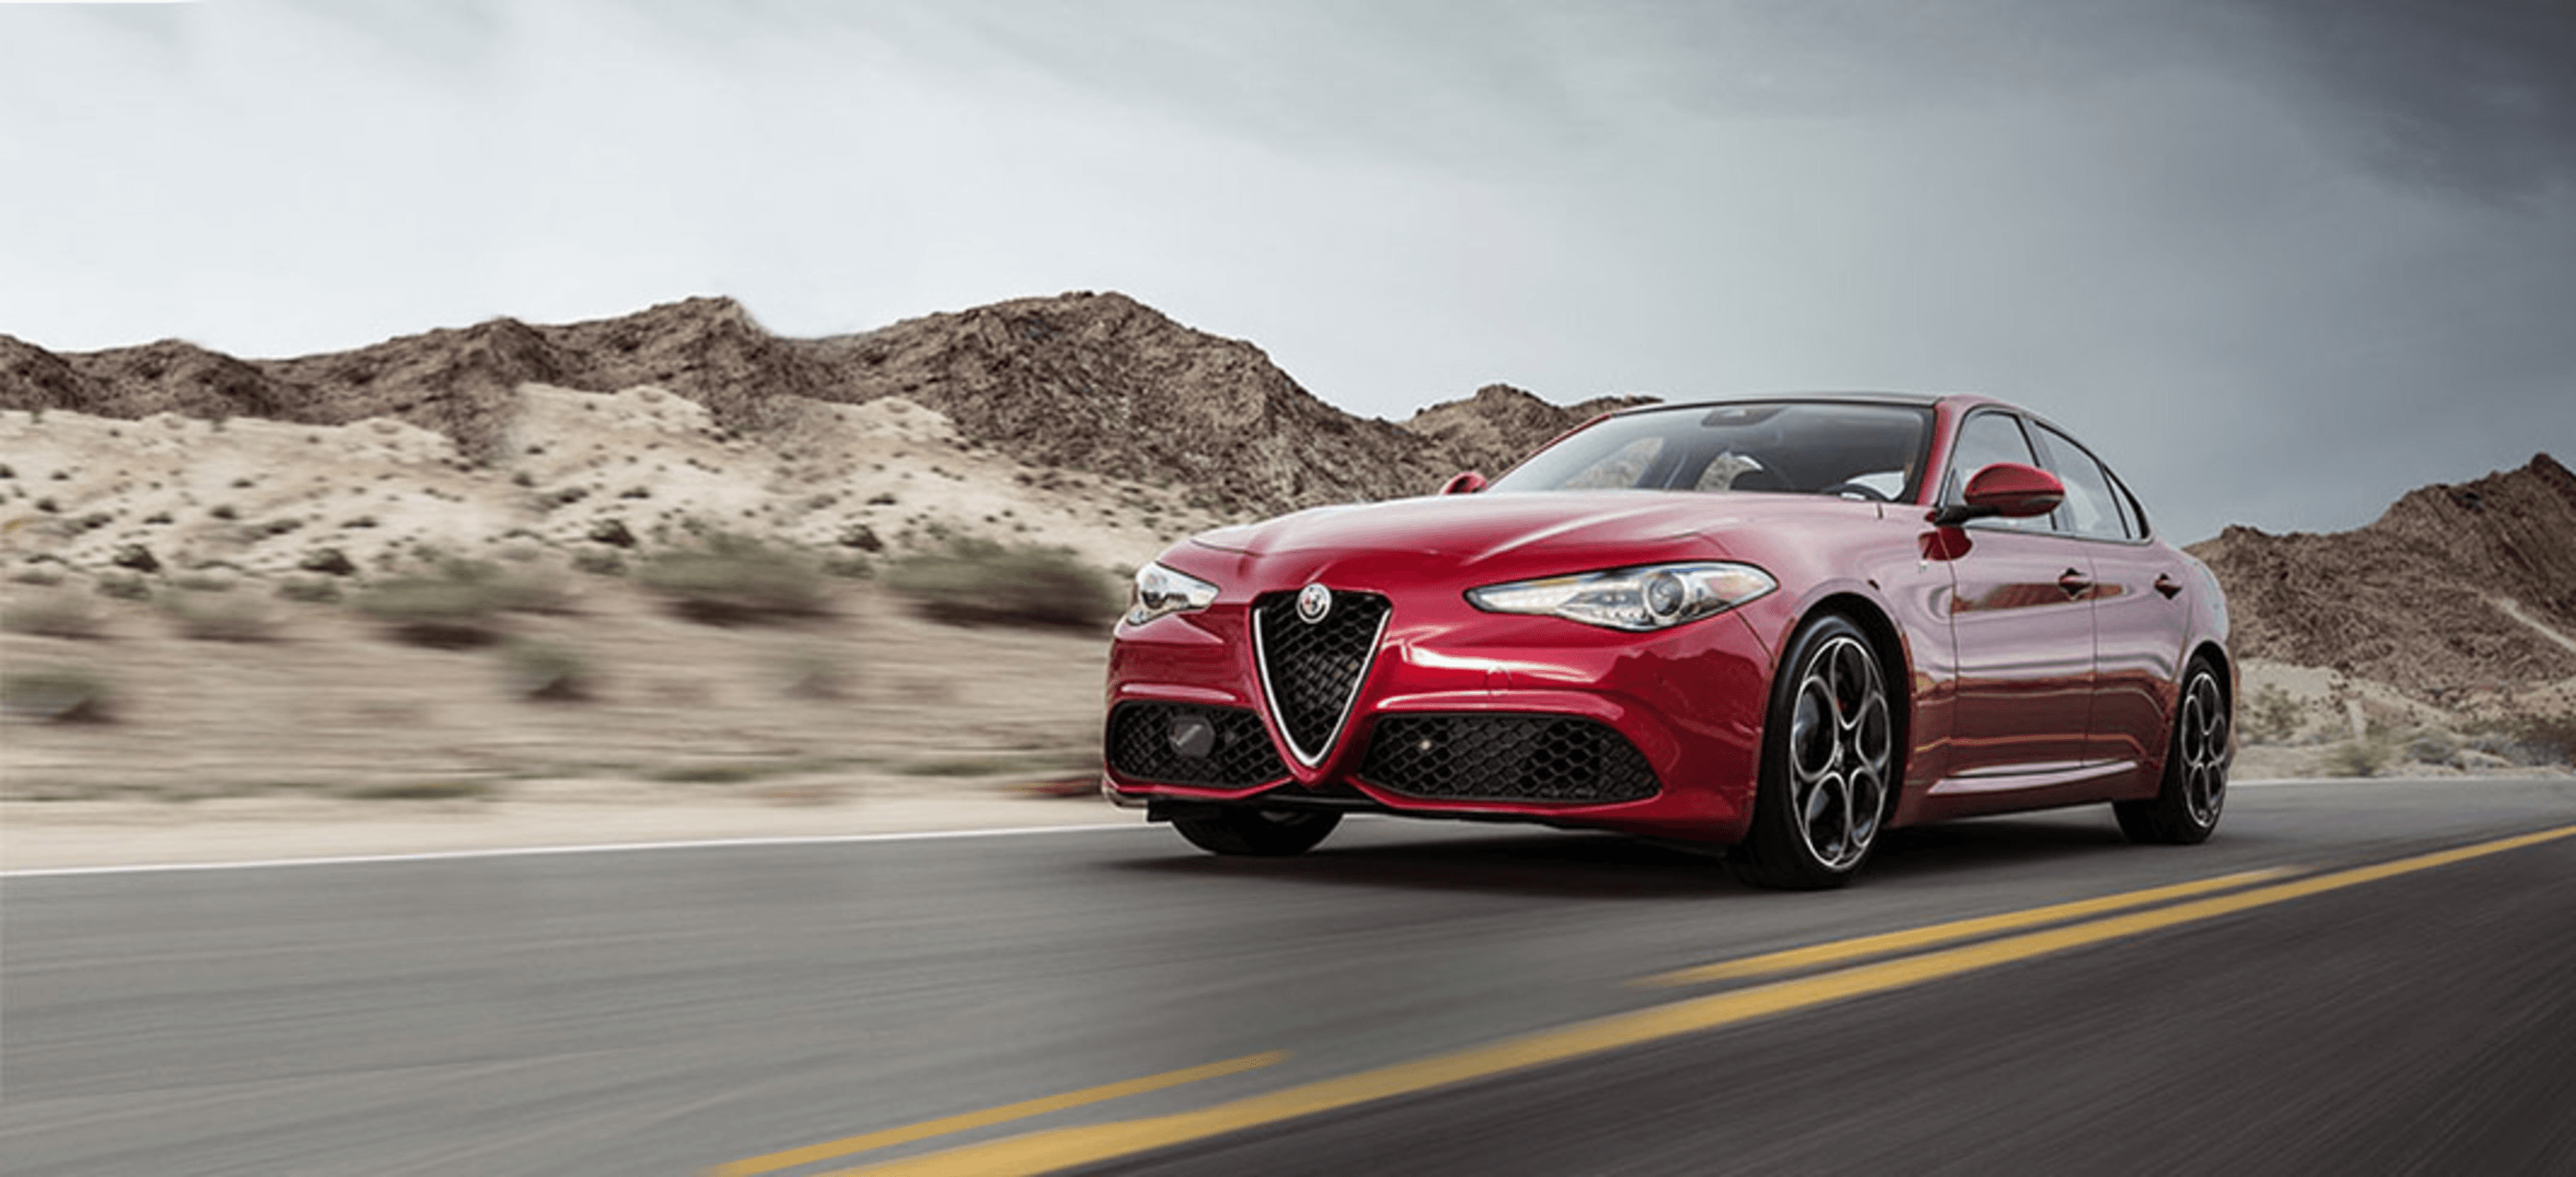 Red 2023 Alfa Romeo Giulia driving on a paved road in the badlands.